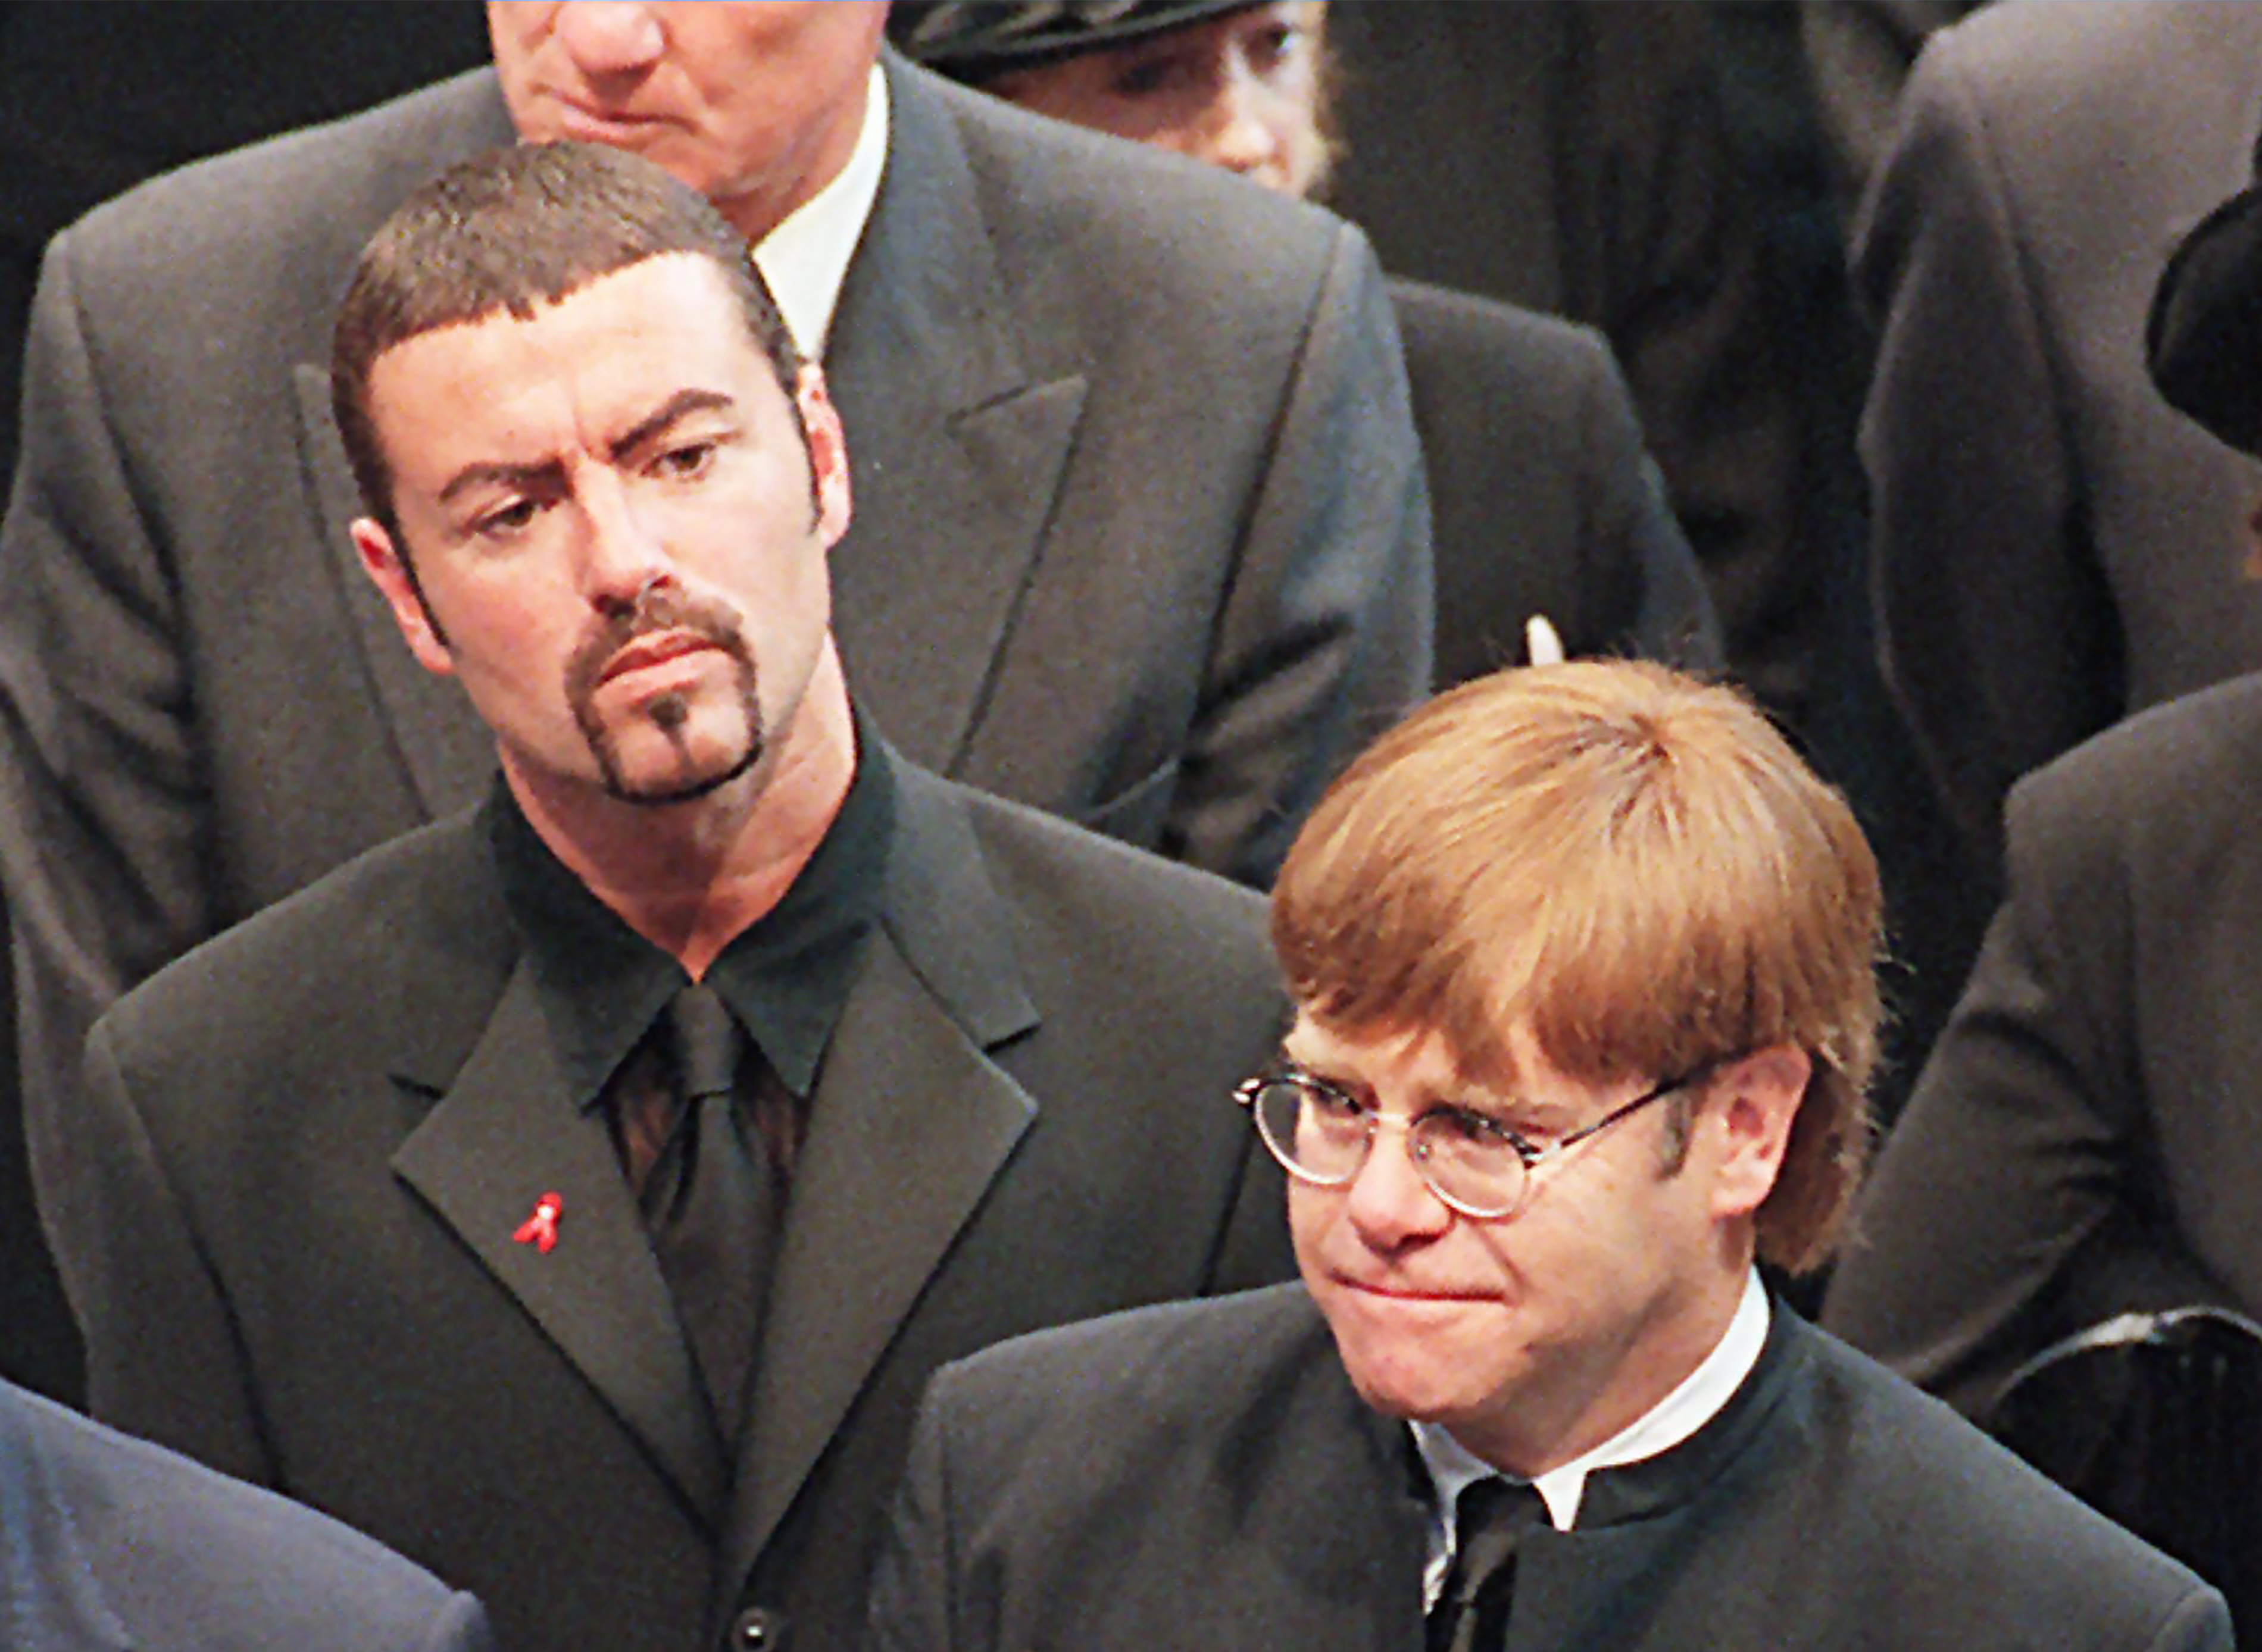 (FILES): This file photo taken on September 6, 1997 shows pop stars George Michael (L) and Elton John (R) leaving Westminster Abbey following the funeral service of Diana, Princess of Wales. British pop singer George Michael, who rose to fame with the band Wham! and sold more than 100 million albums in his career, has died aged 53, his publicist said on Sunday, December 25, 2016. / AFP PHOTO / AFP POOL / JOHNNY EGGITT